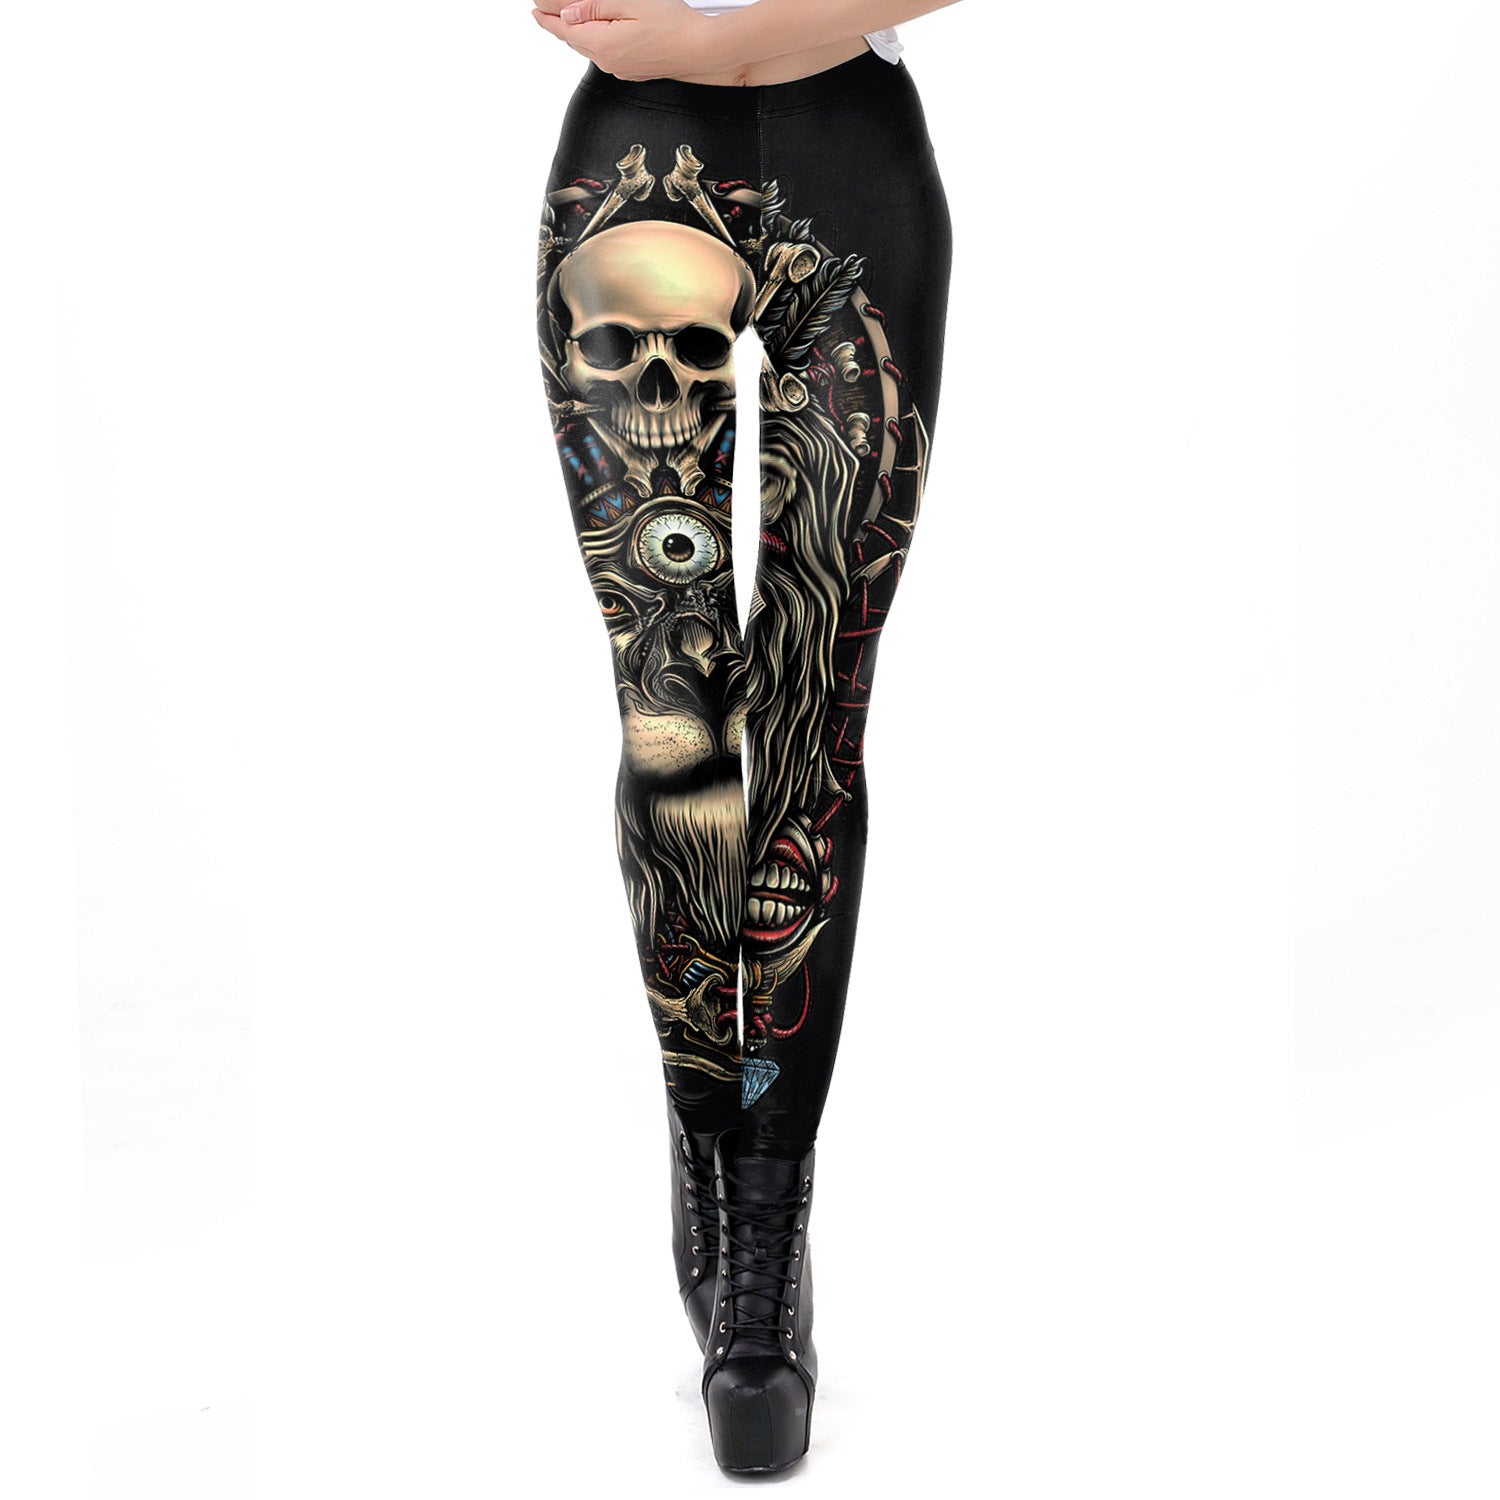 A woman adding a Gothic flair to her outfit with a pair of Maramalive™ Gothic Women's Leggings - Dark Mystic tight pants featuring a skull design.